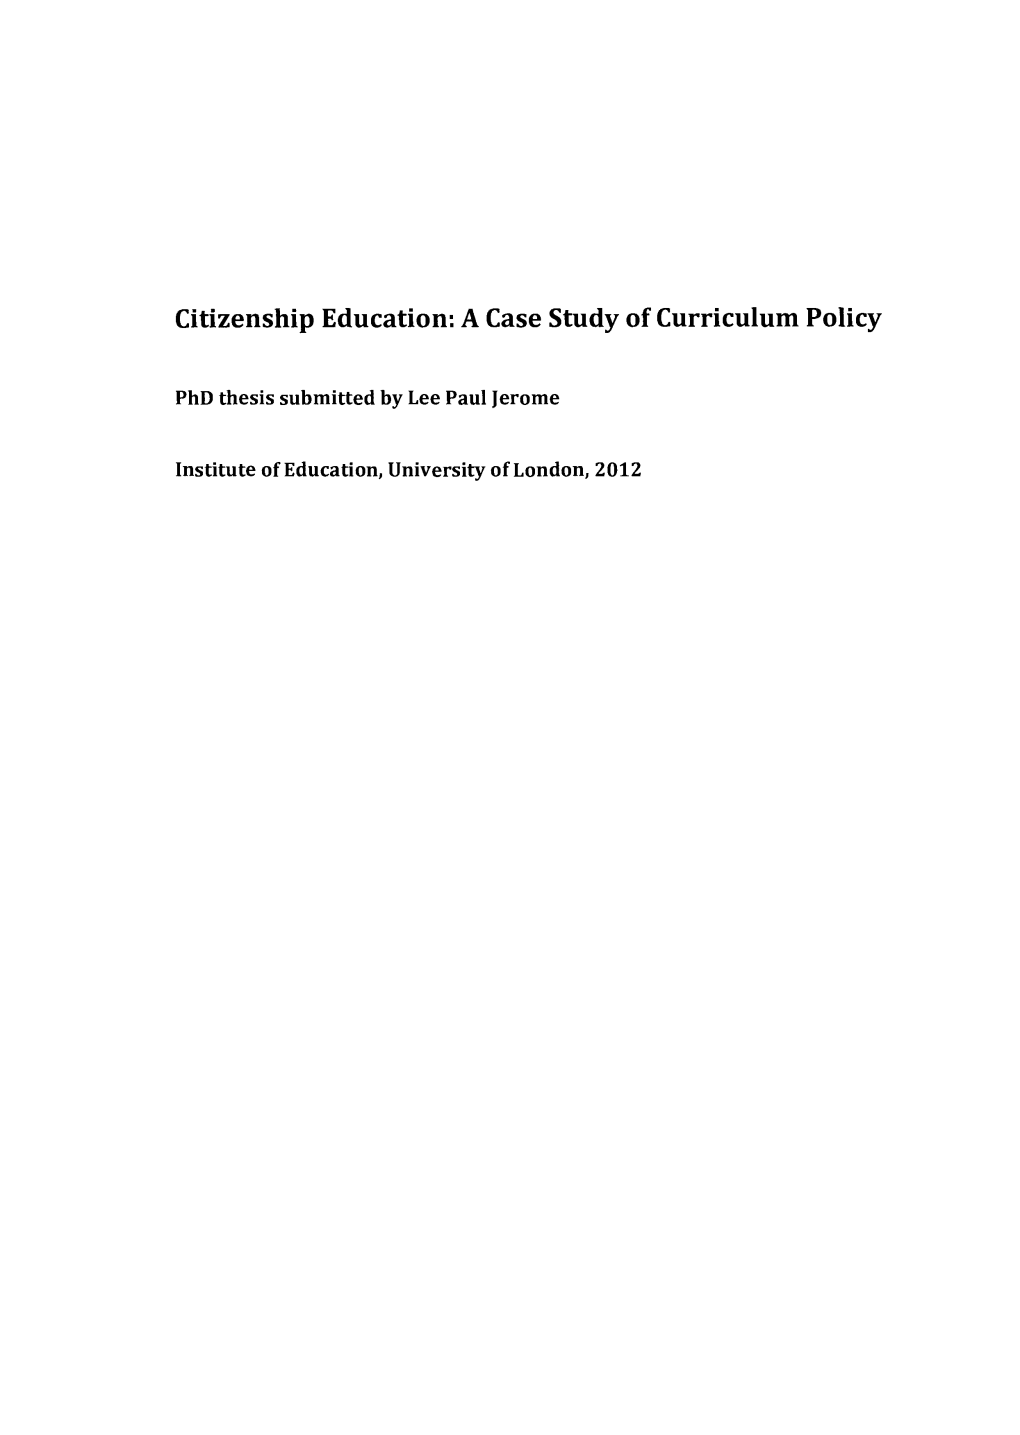 Citizenship Education: a Case Study of Curriculum Policy